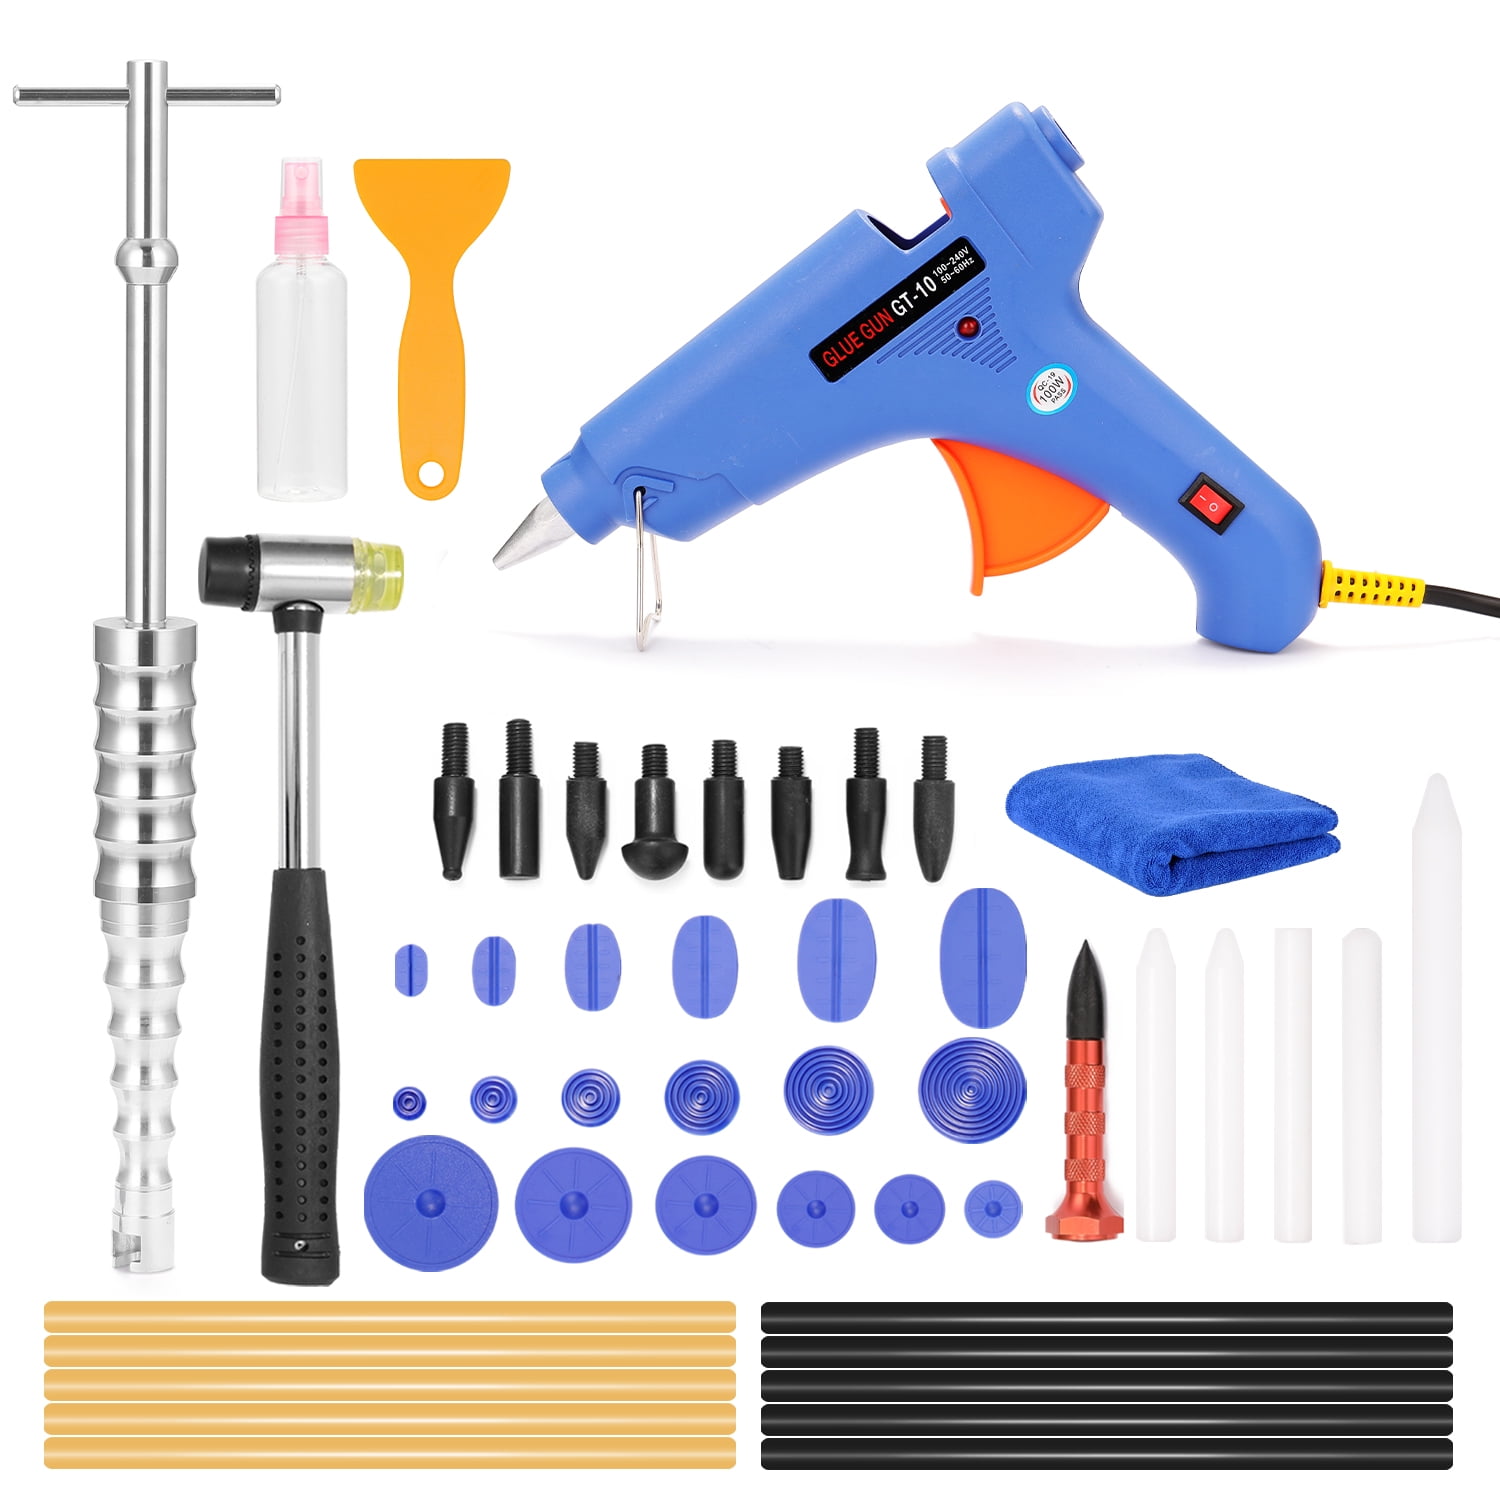 Details about   PDR Dent Lifter Puller Glue Tabs Set Car Hail Paintless Removal Repair Tools Kit 